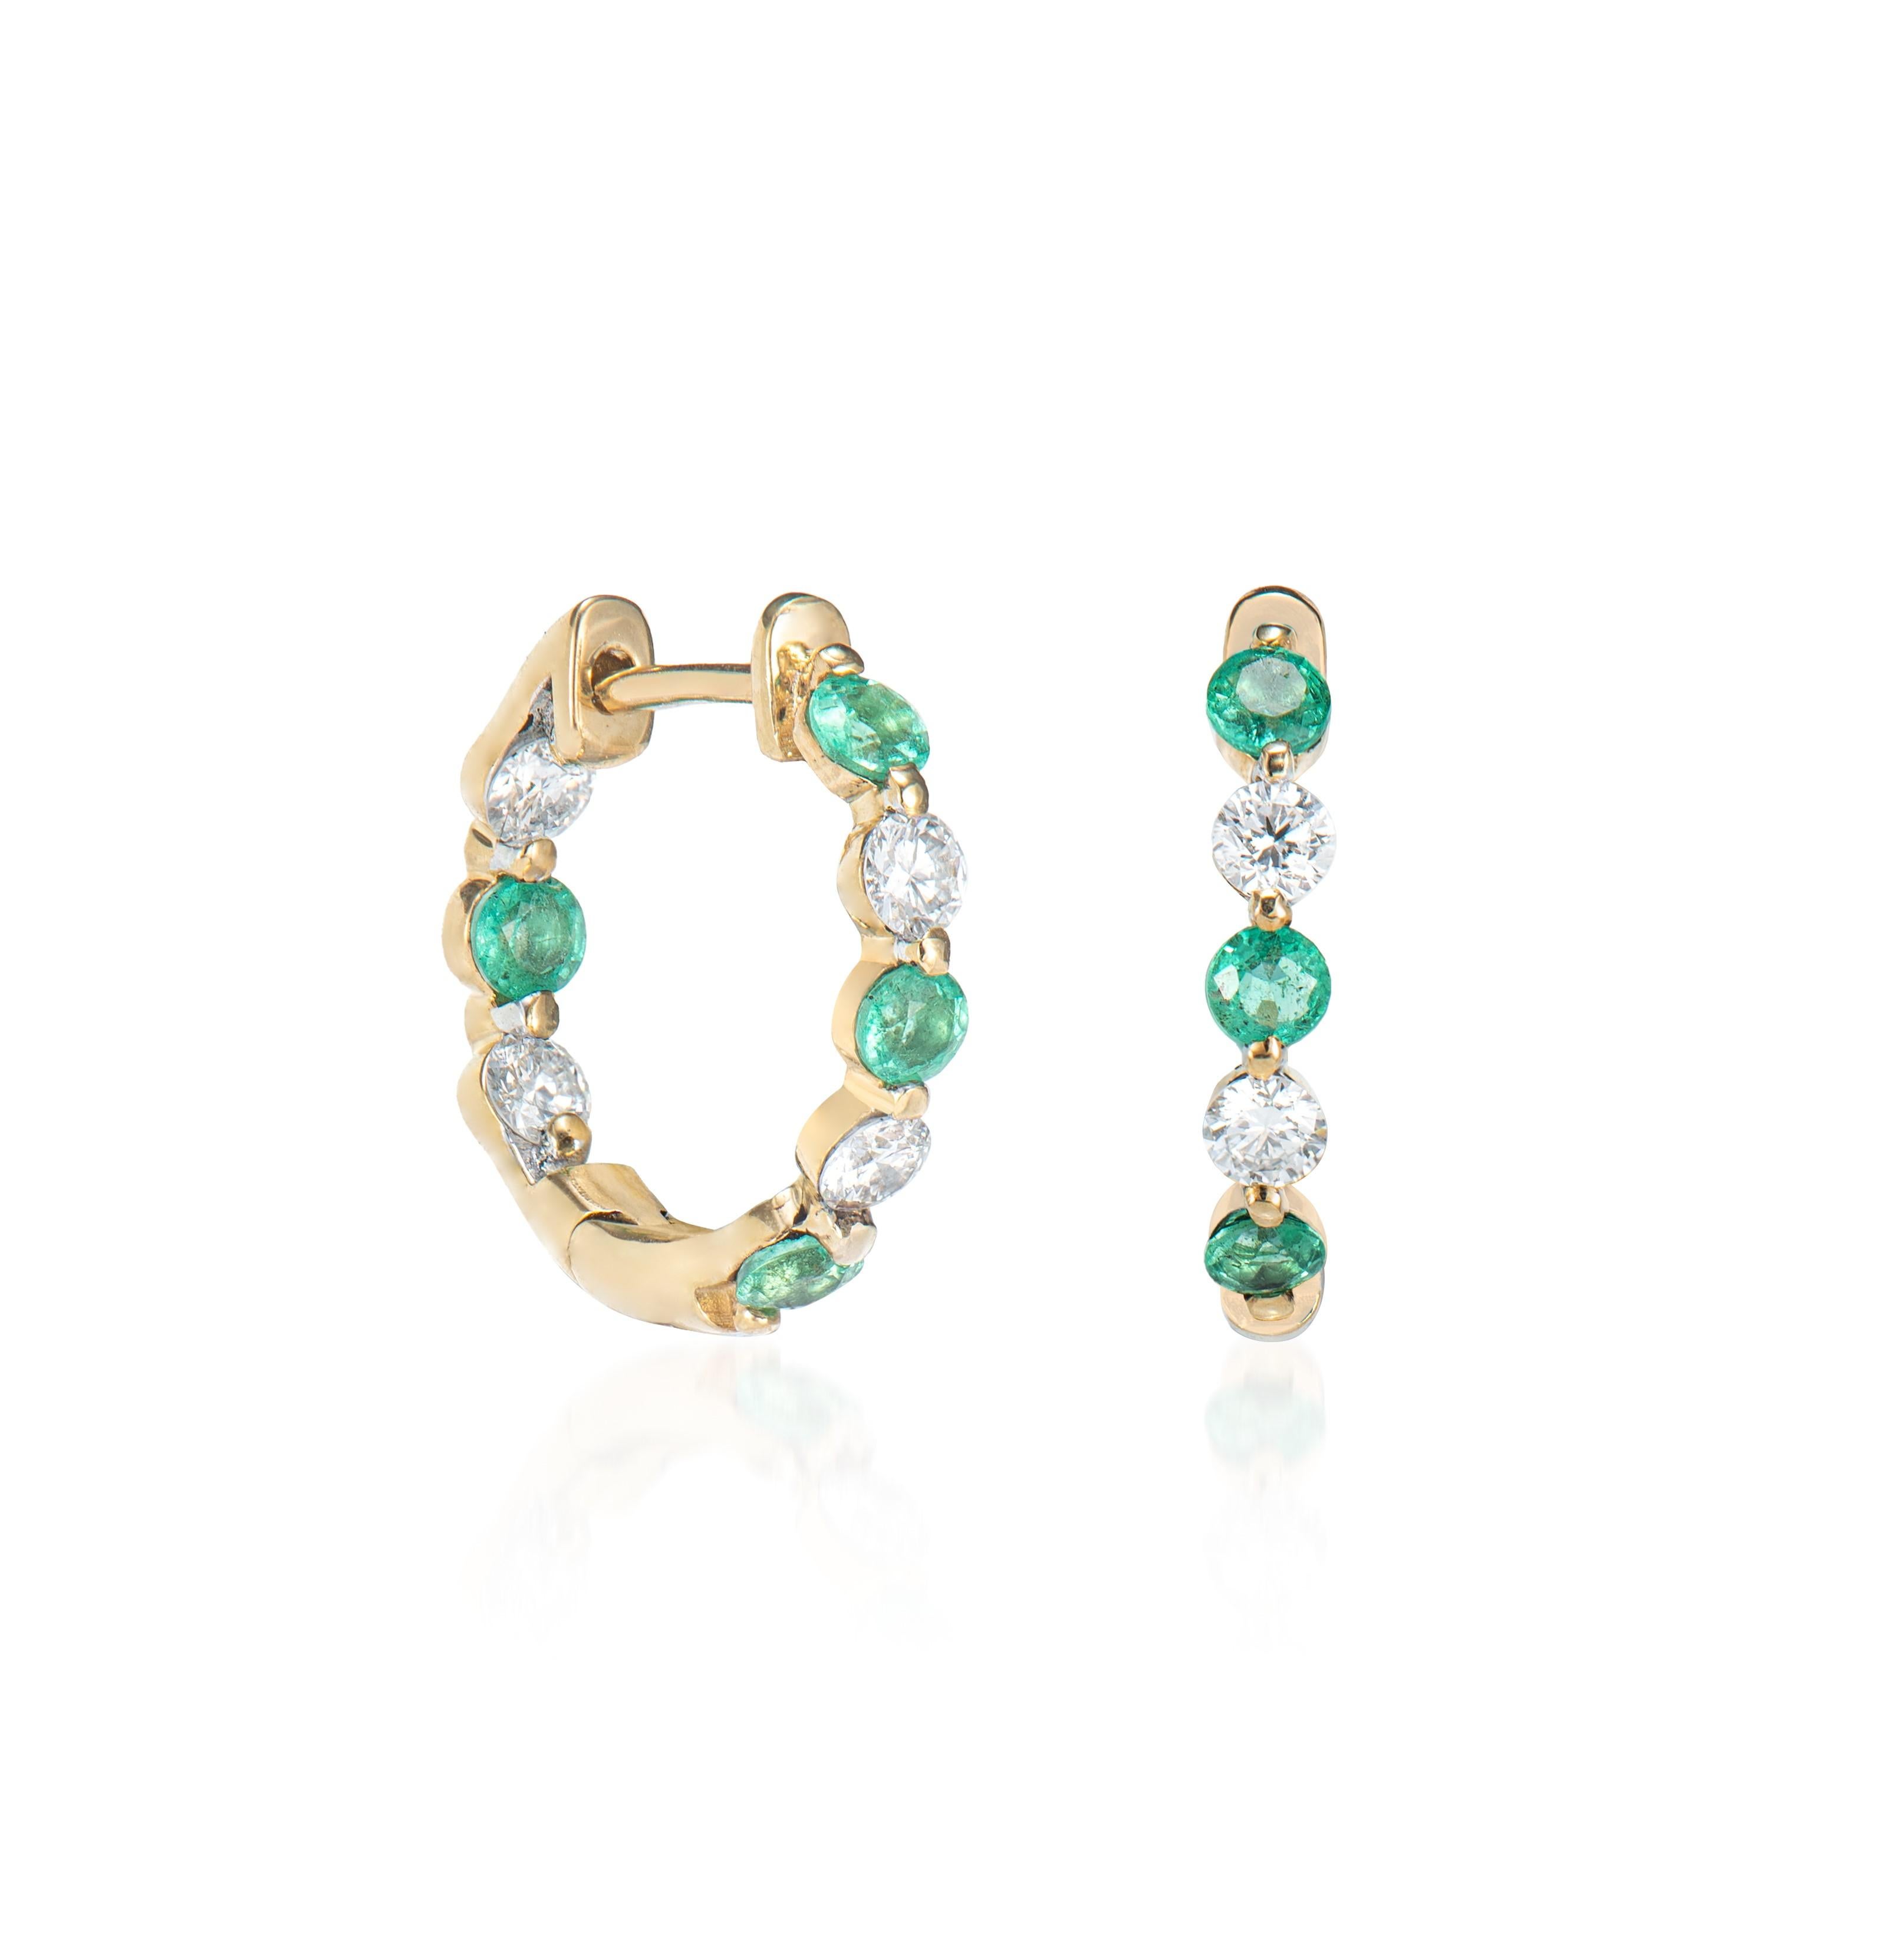 These are Classic Hoop earrings in a Round shape. The hoops earrings are elegant and can be worn for many occasions. Accented with White Diamonds these Hoop Earrings are made in yellow gold and present a classic yet elegant look. 

Emerald Hoop